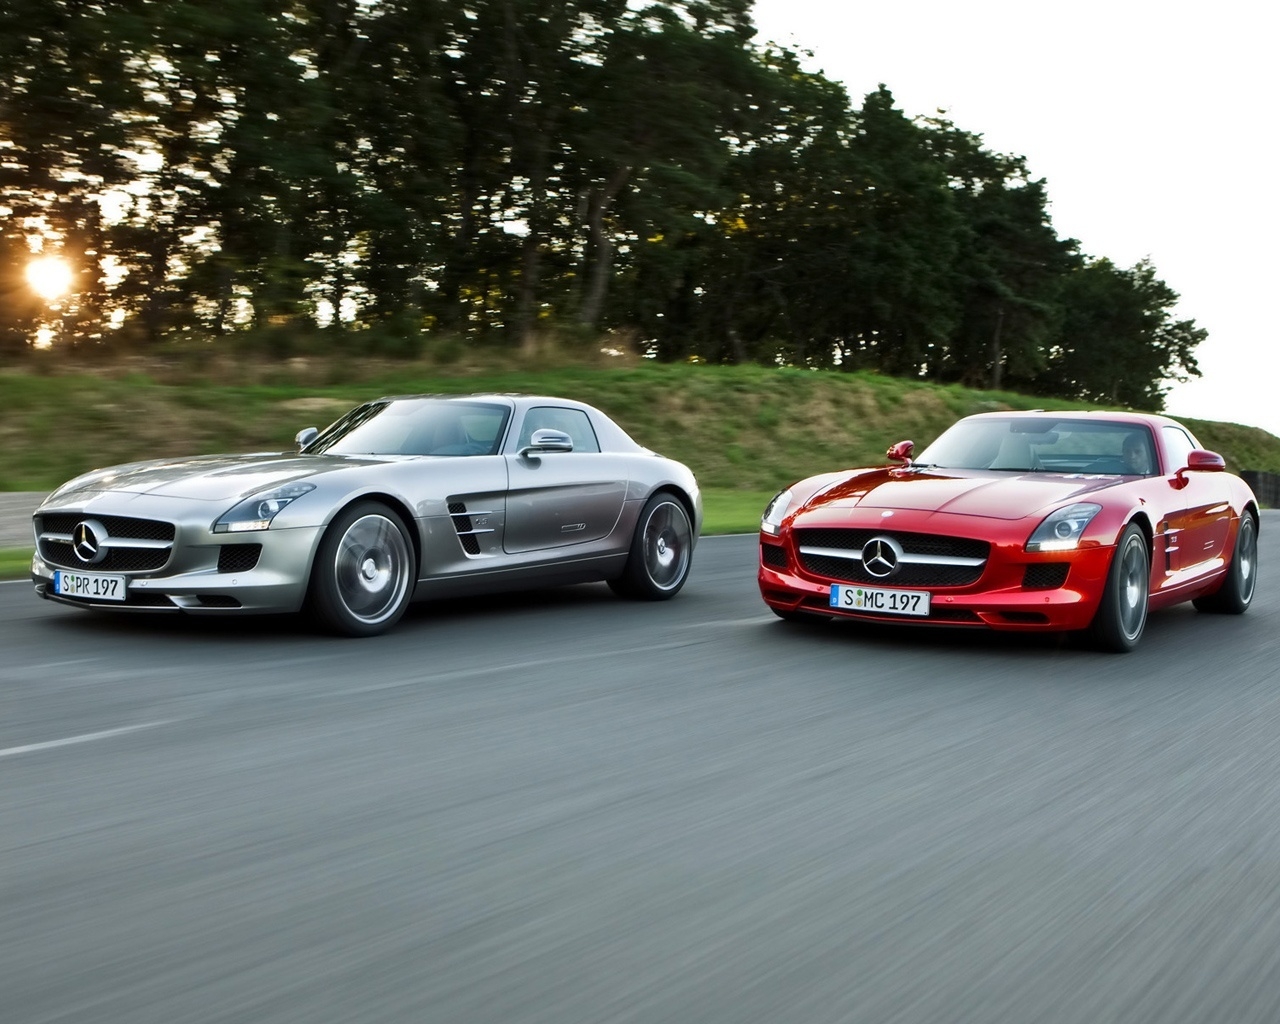 Mercedes-Benz SLS AMG Duo 2010 for 1280 x 1024 resolution